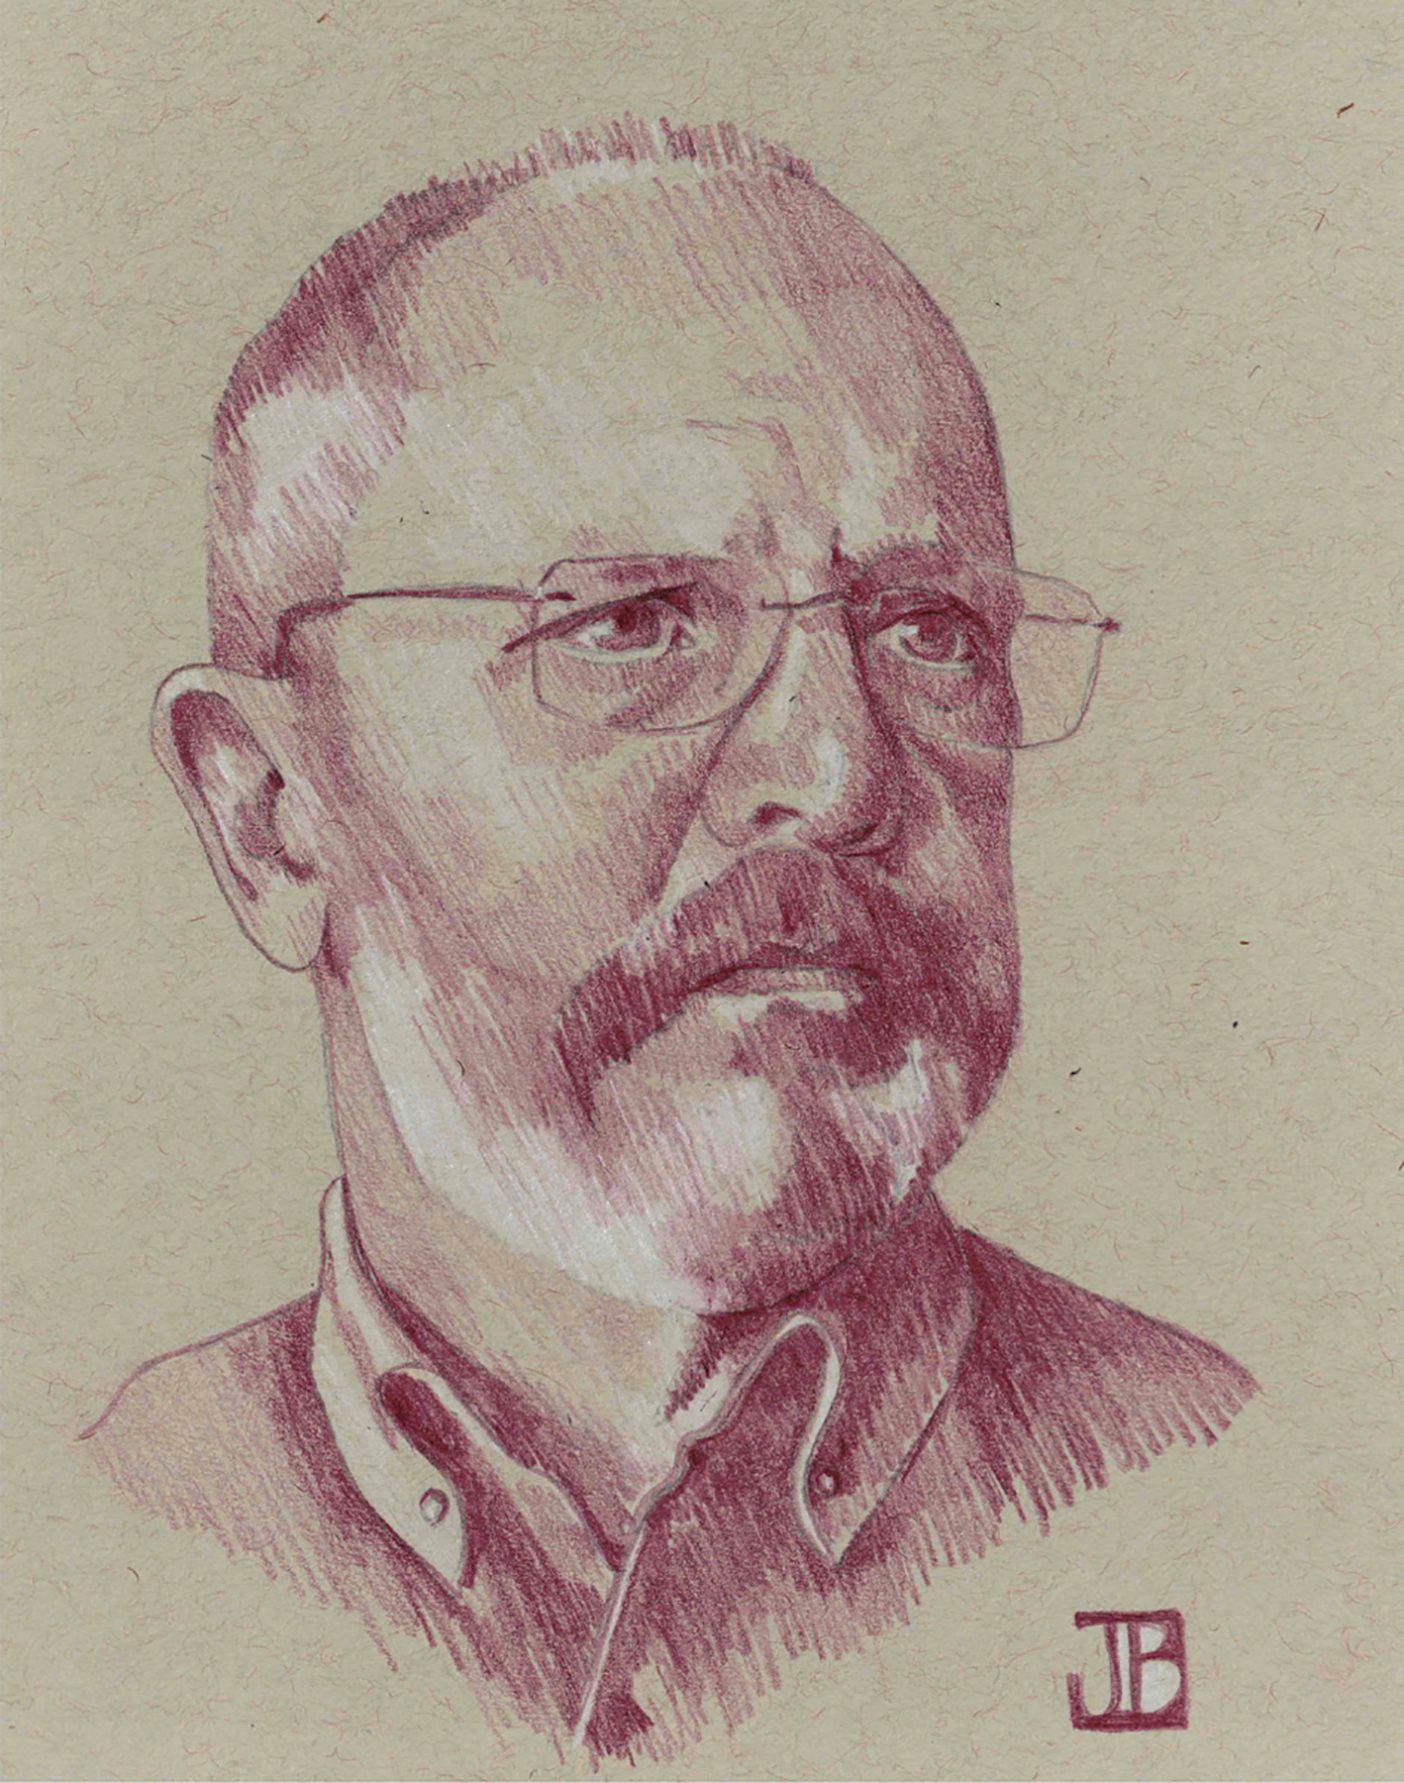 A sketch of Greg Bean by his wife, Jean.